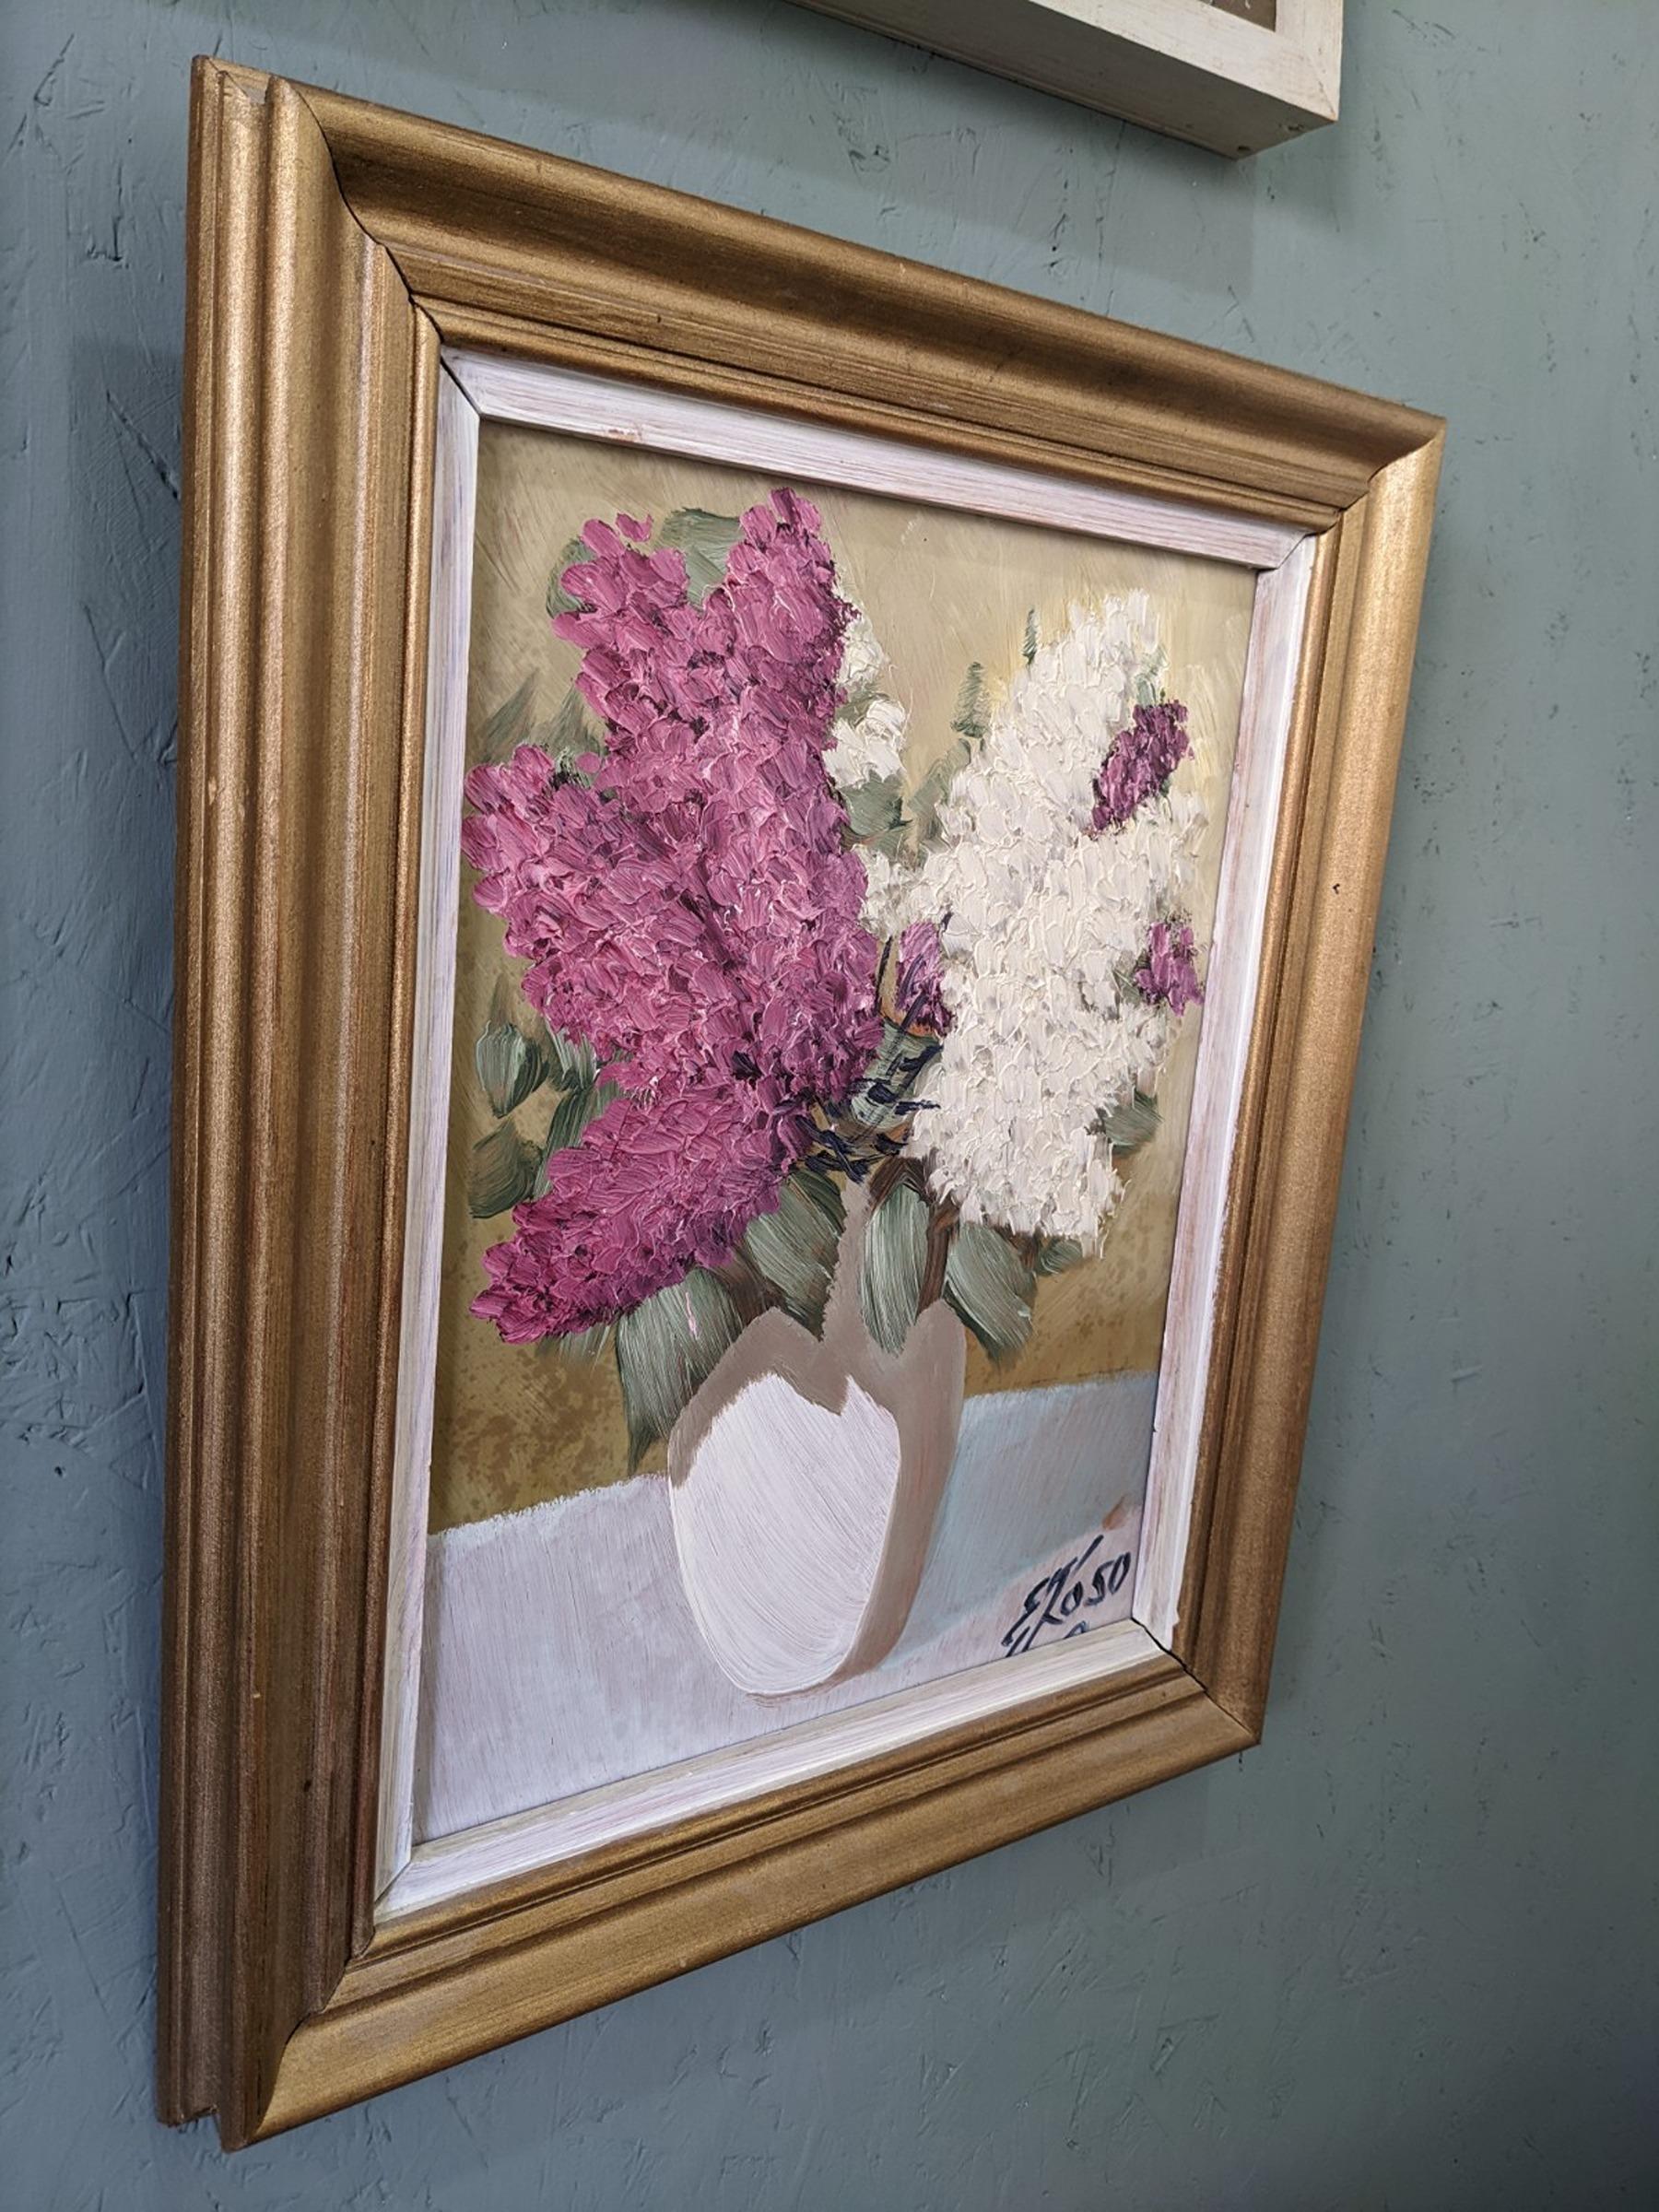 HYACINTHS
Size: 52 x 42 cm (including frame)
Oil on Board

An expressive and beautifully textured mid-century floral still life painting, executed in oil onto board.

The composition centers around a bouquet of pink and white hyacinths, carefully